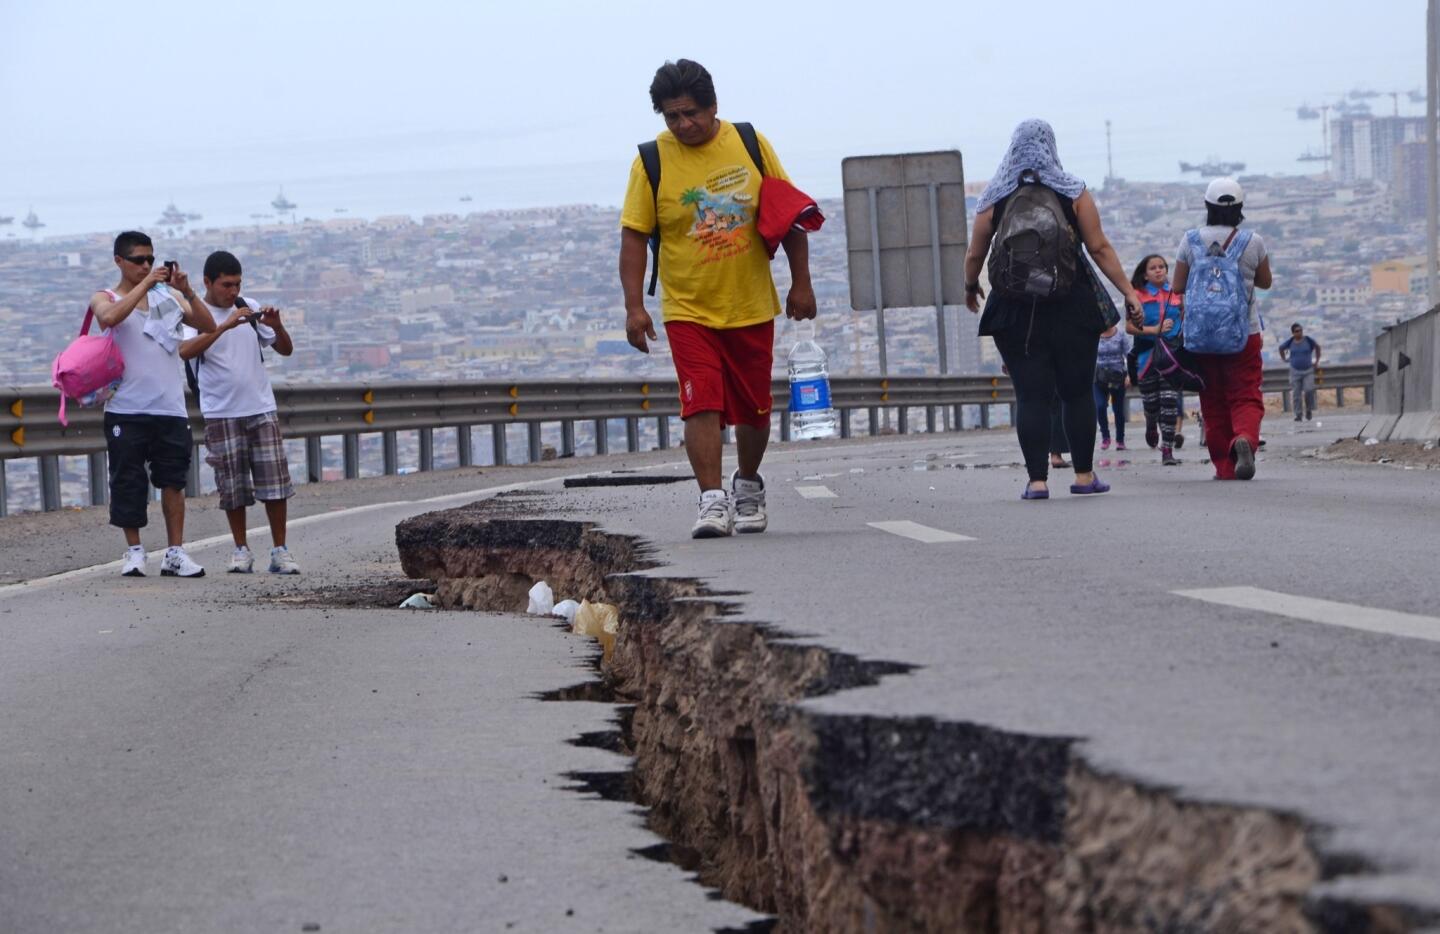 People walk along a cracked road in Iquique, in northern Chile, a day after a powerful earthquake hit Chile's Pacific coast, killing at least six people and generating tsunami waves that might ripple as far as Indonesia.